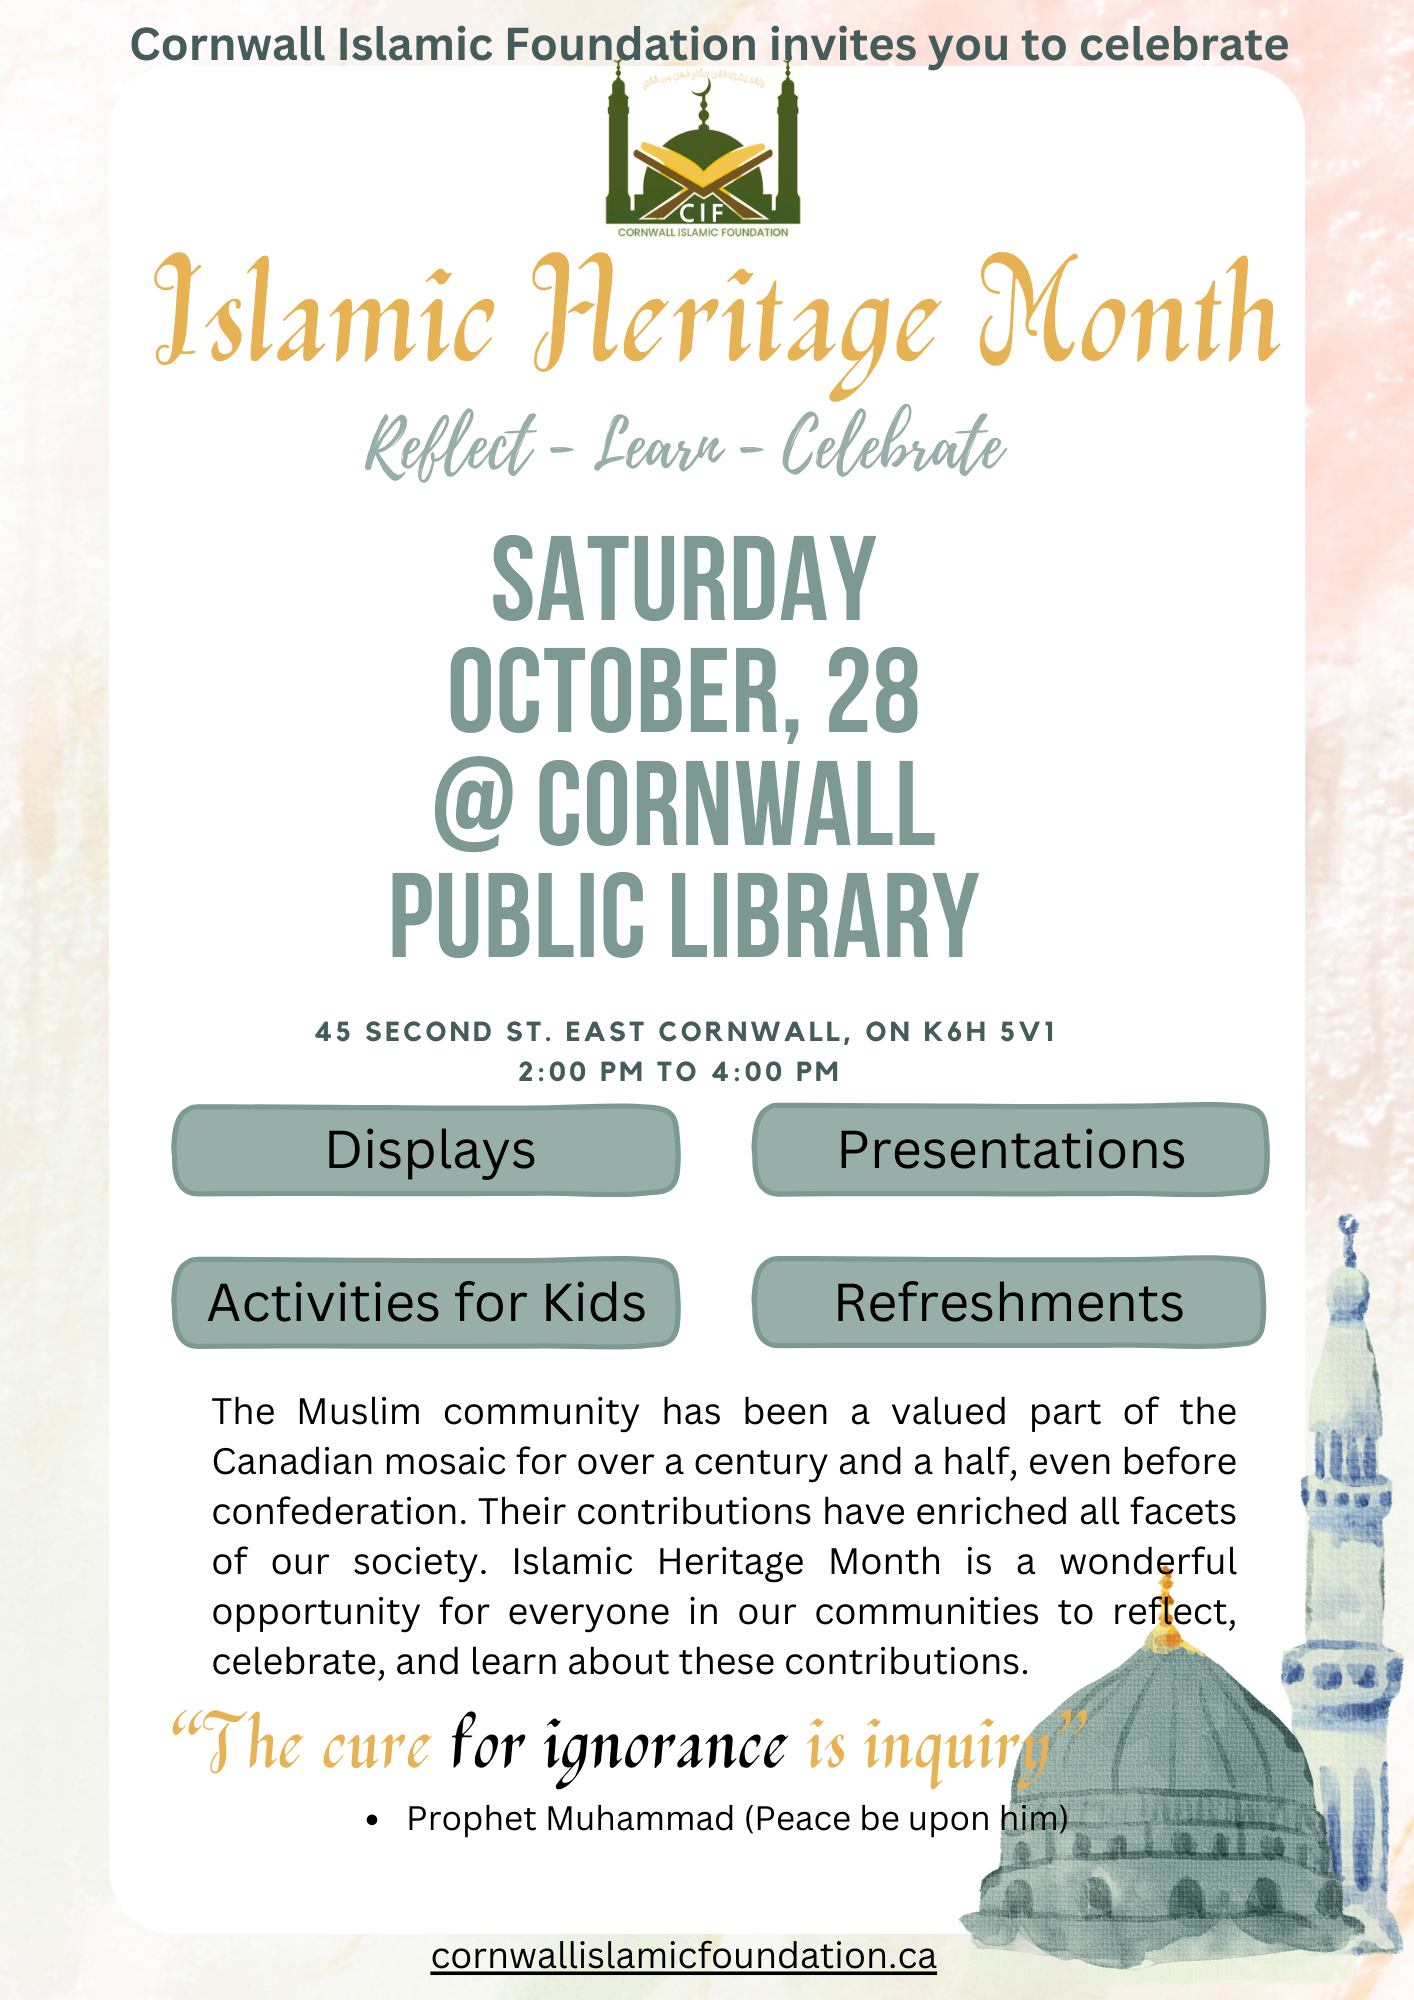 Cornwall Islamic Foundation invites you to celebrate Islamic Heritage Month. Reflect-Learn-Celebrate. Saturday, October 28 @ Cornwall Public Library. The Muslim community has been a valued part of the Canadian mosaic for over a century and a half, even before confederation. Their contributions have enriched all facets of our society. Islamic Heritage Month is a wonderful opportunity for everyone in our communities to reflect, celebrate, and learn about these contributions.